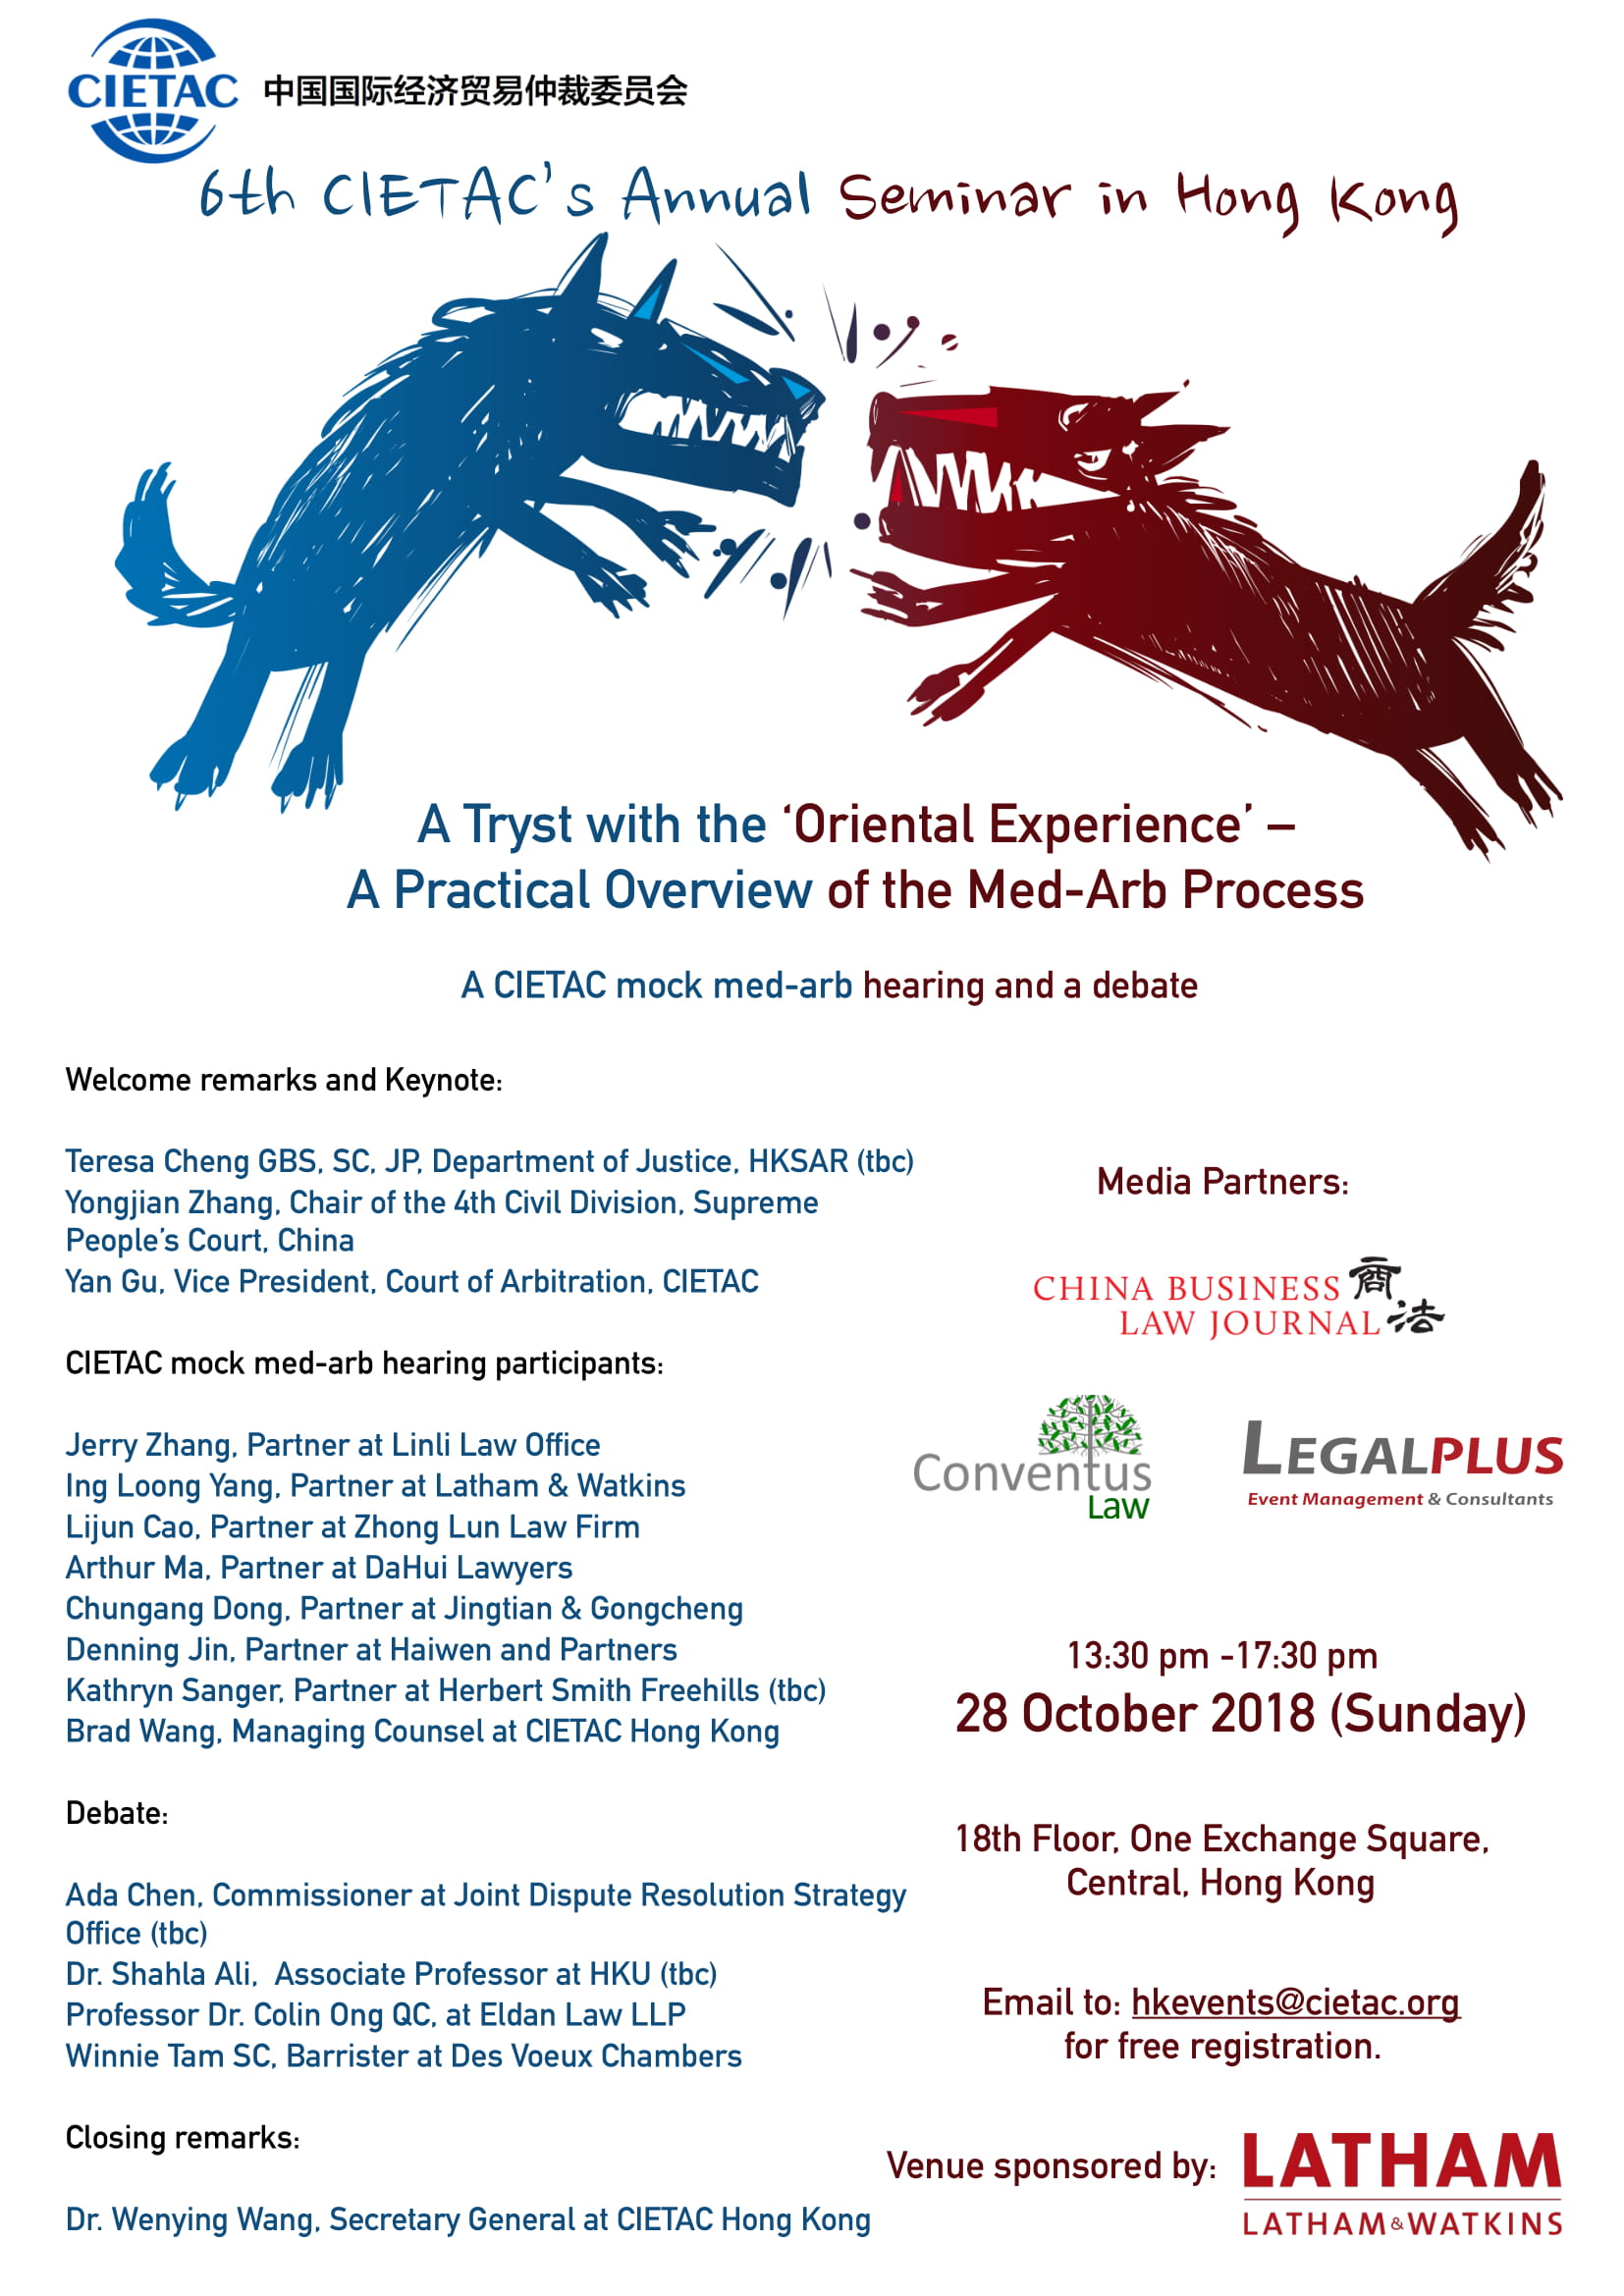 Supported Event: 6th CIETAC Annual Event “A Tryst with the Oriental Experience – A Practical Overview of the Med-Arb Process”